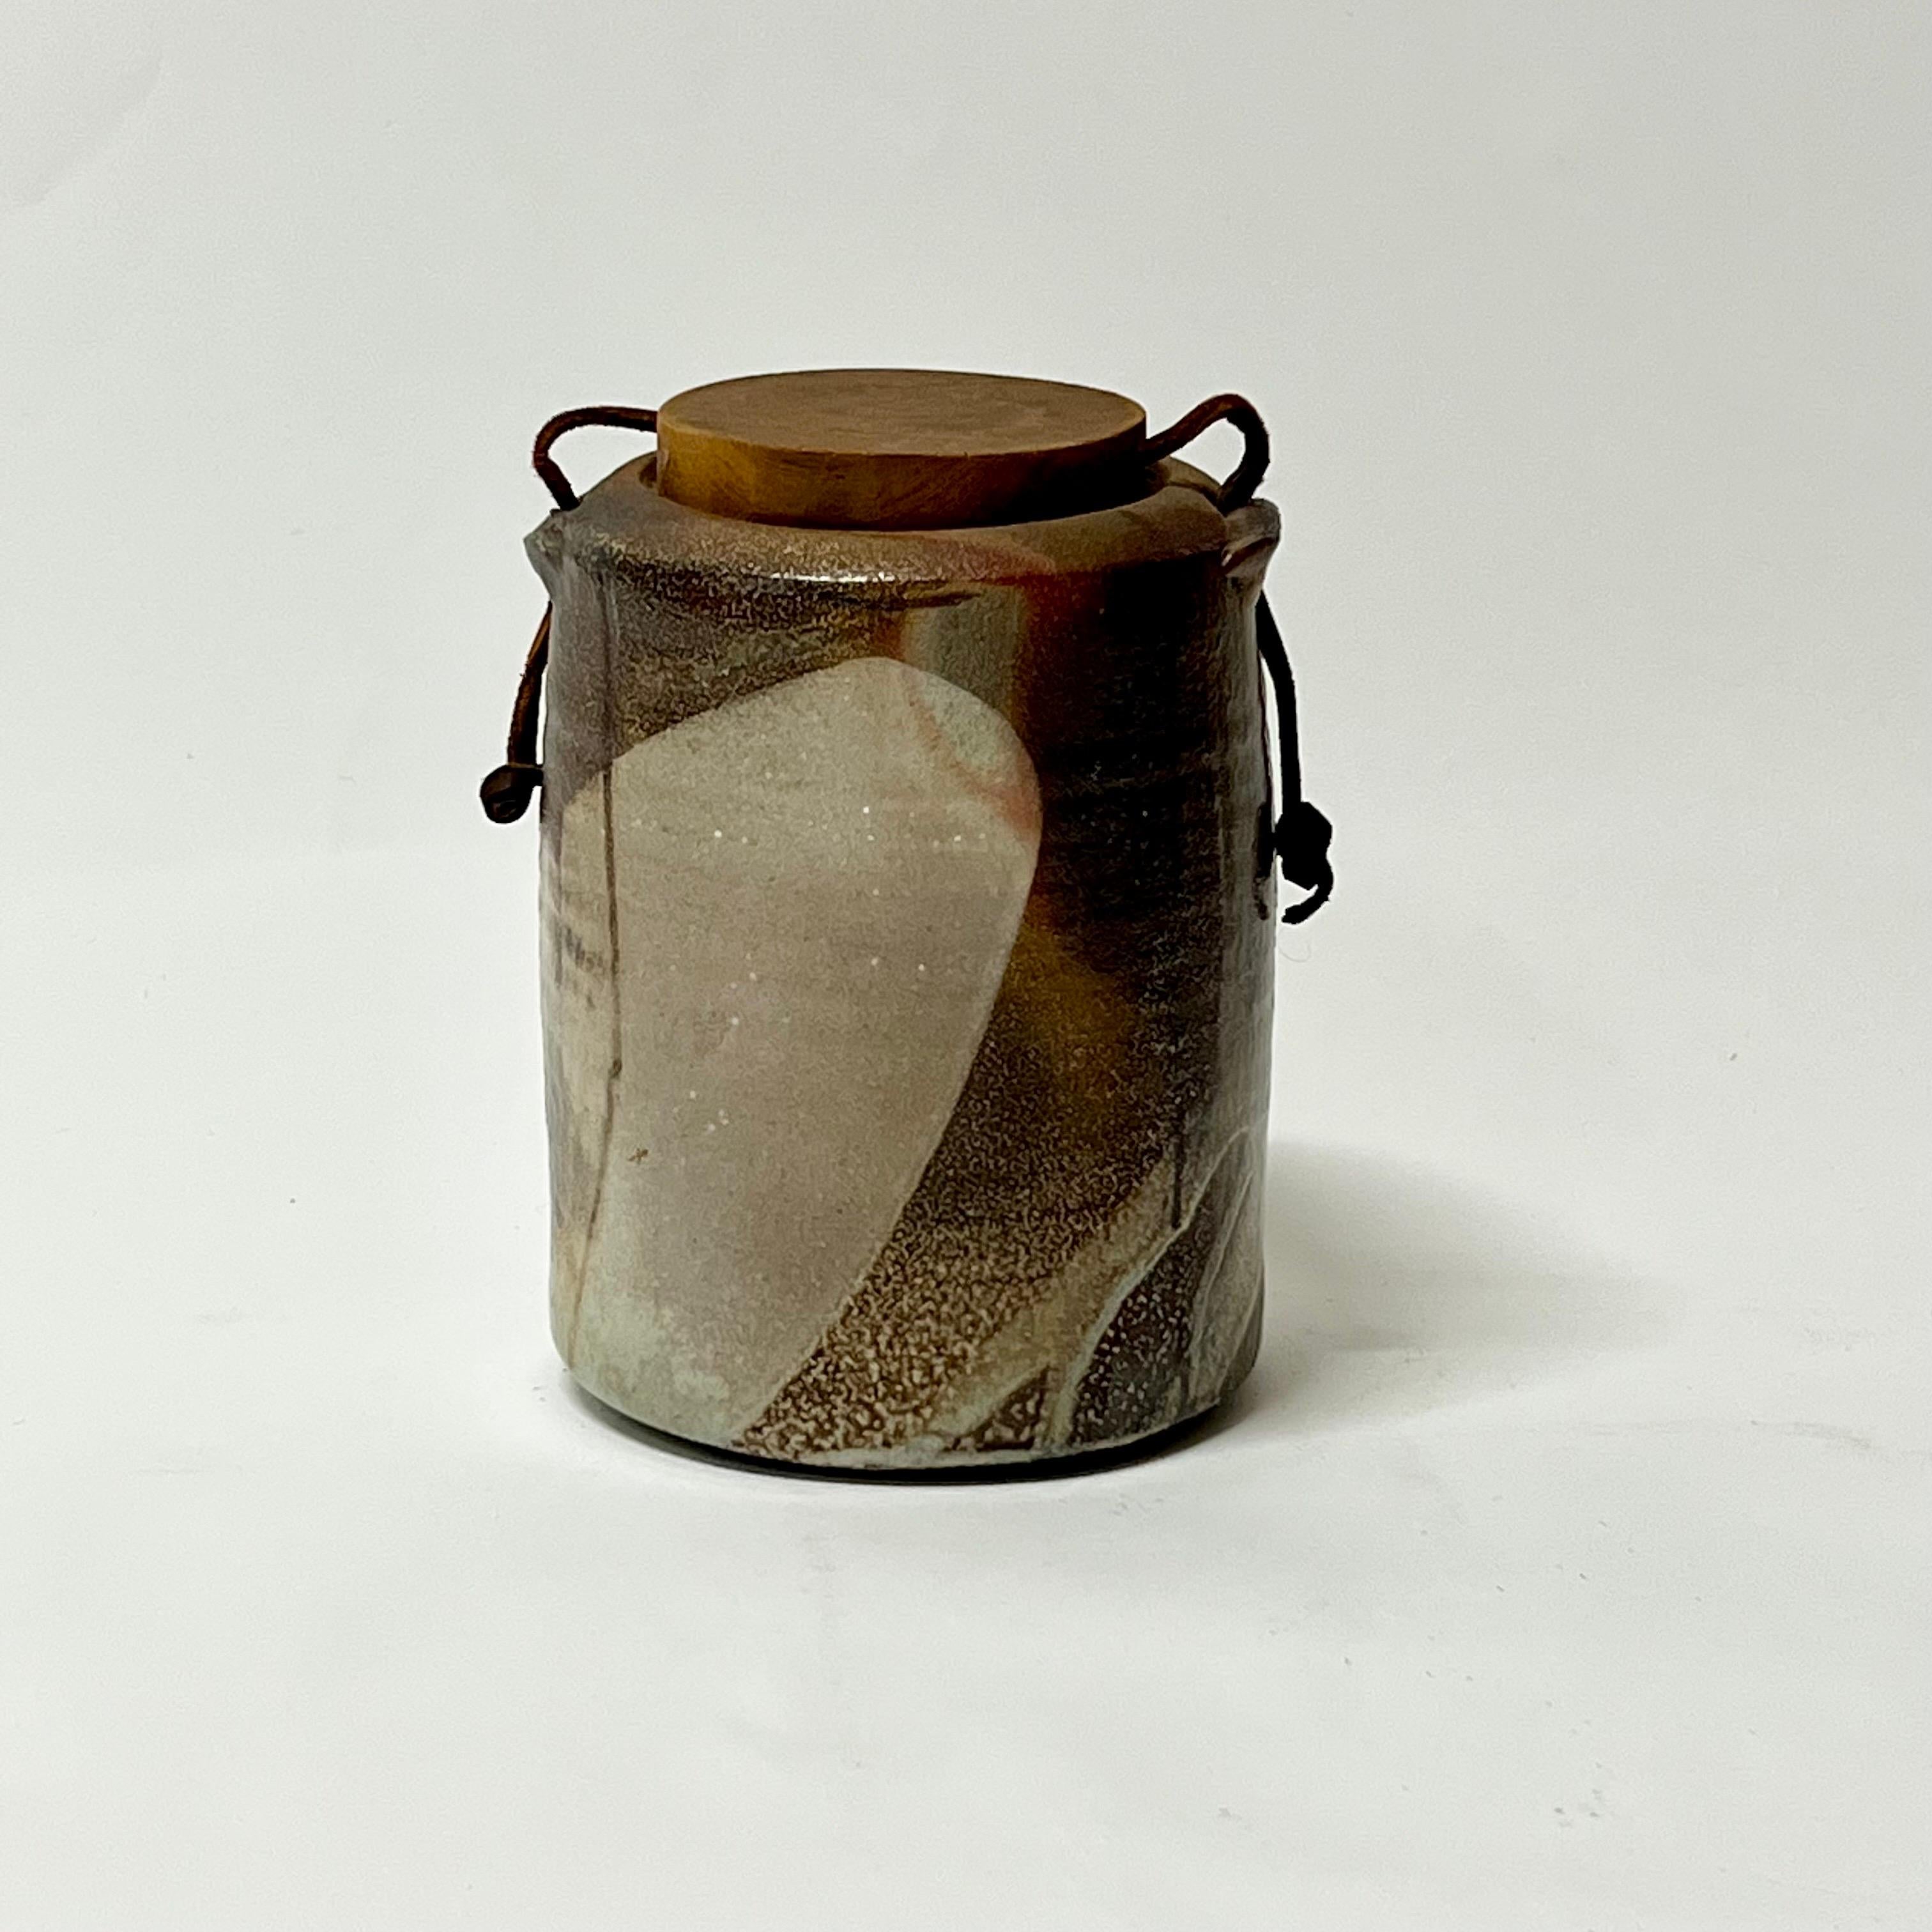 Amazing lidded cylinder vessel by well listed potter, Sandra Johnstone circa 1970s. Johnstone (1936-1991) studied with Peter Voulkos at UC Berkeley in the 1950s. In addition Johnstone also studied with Paul Soldner. She eventually went on to build